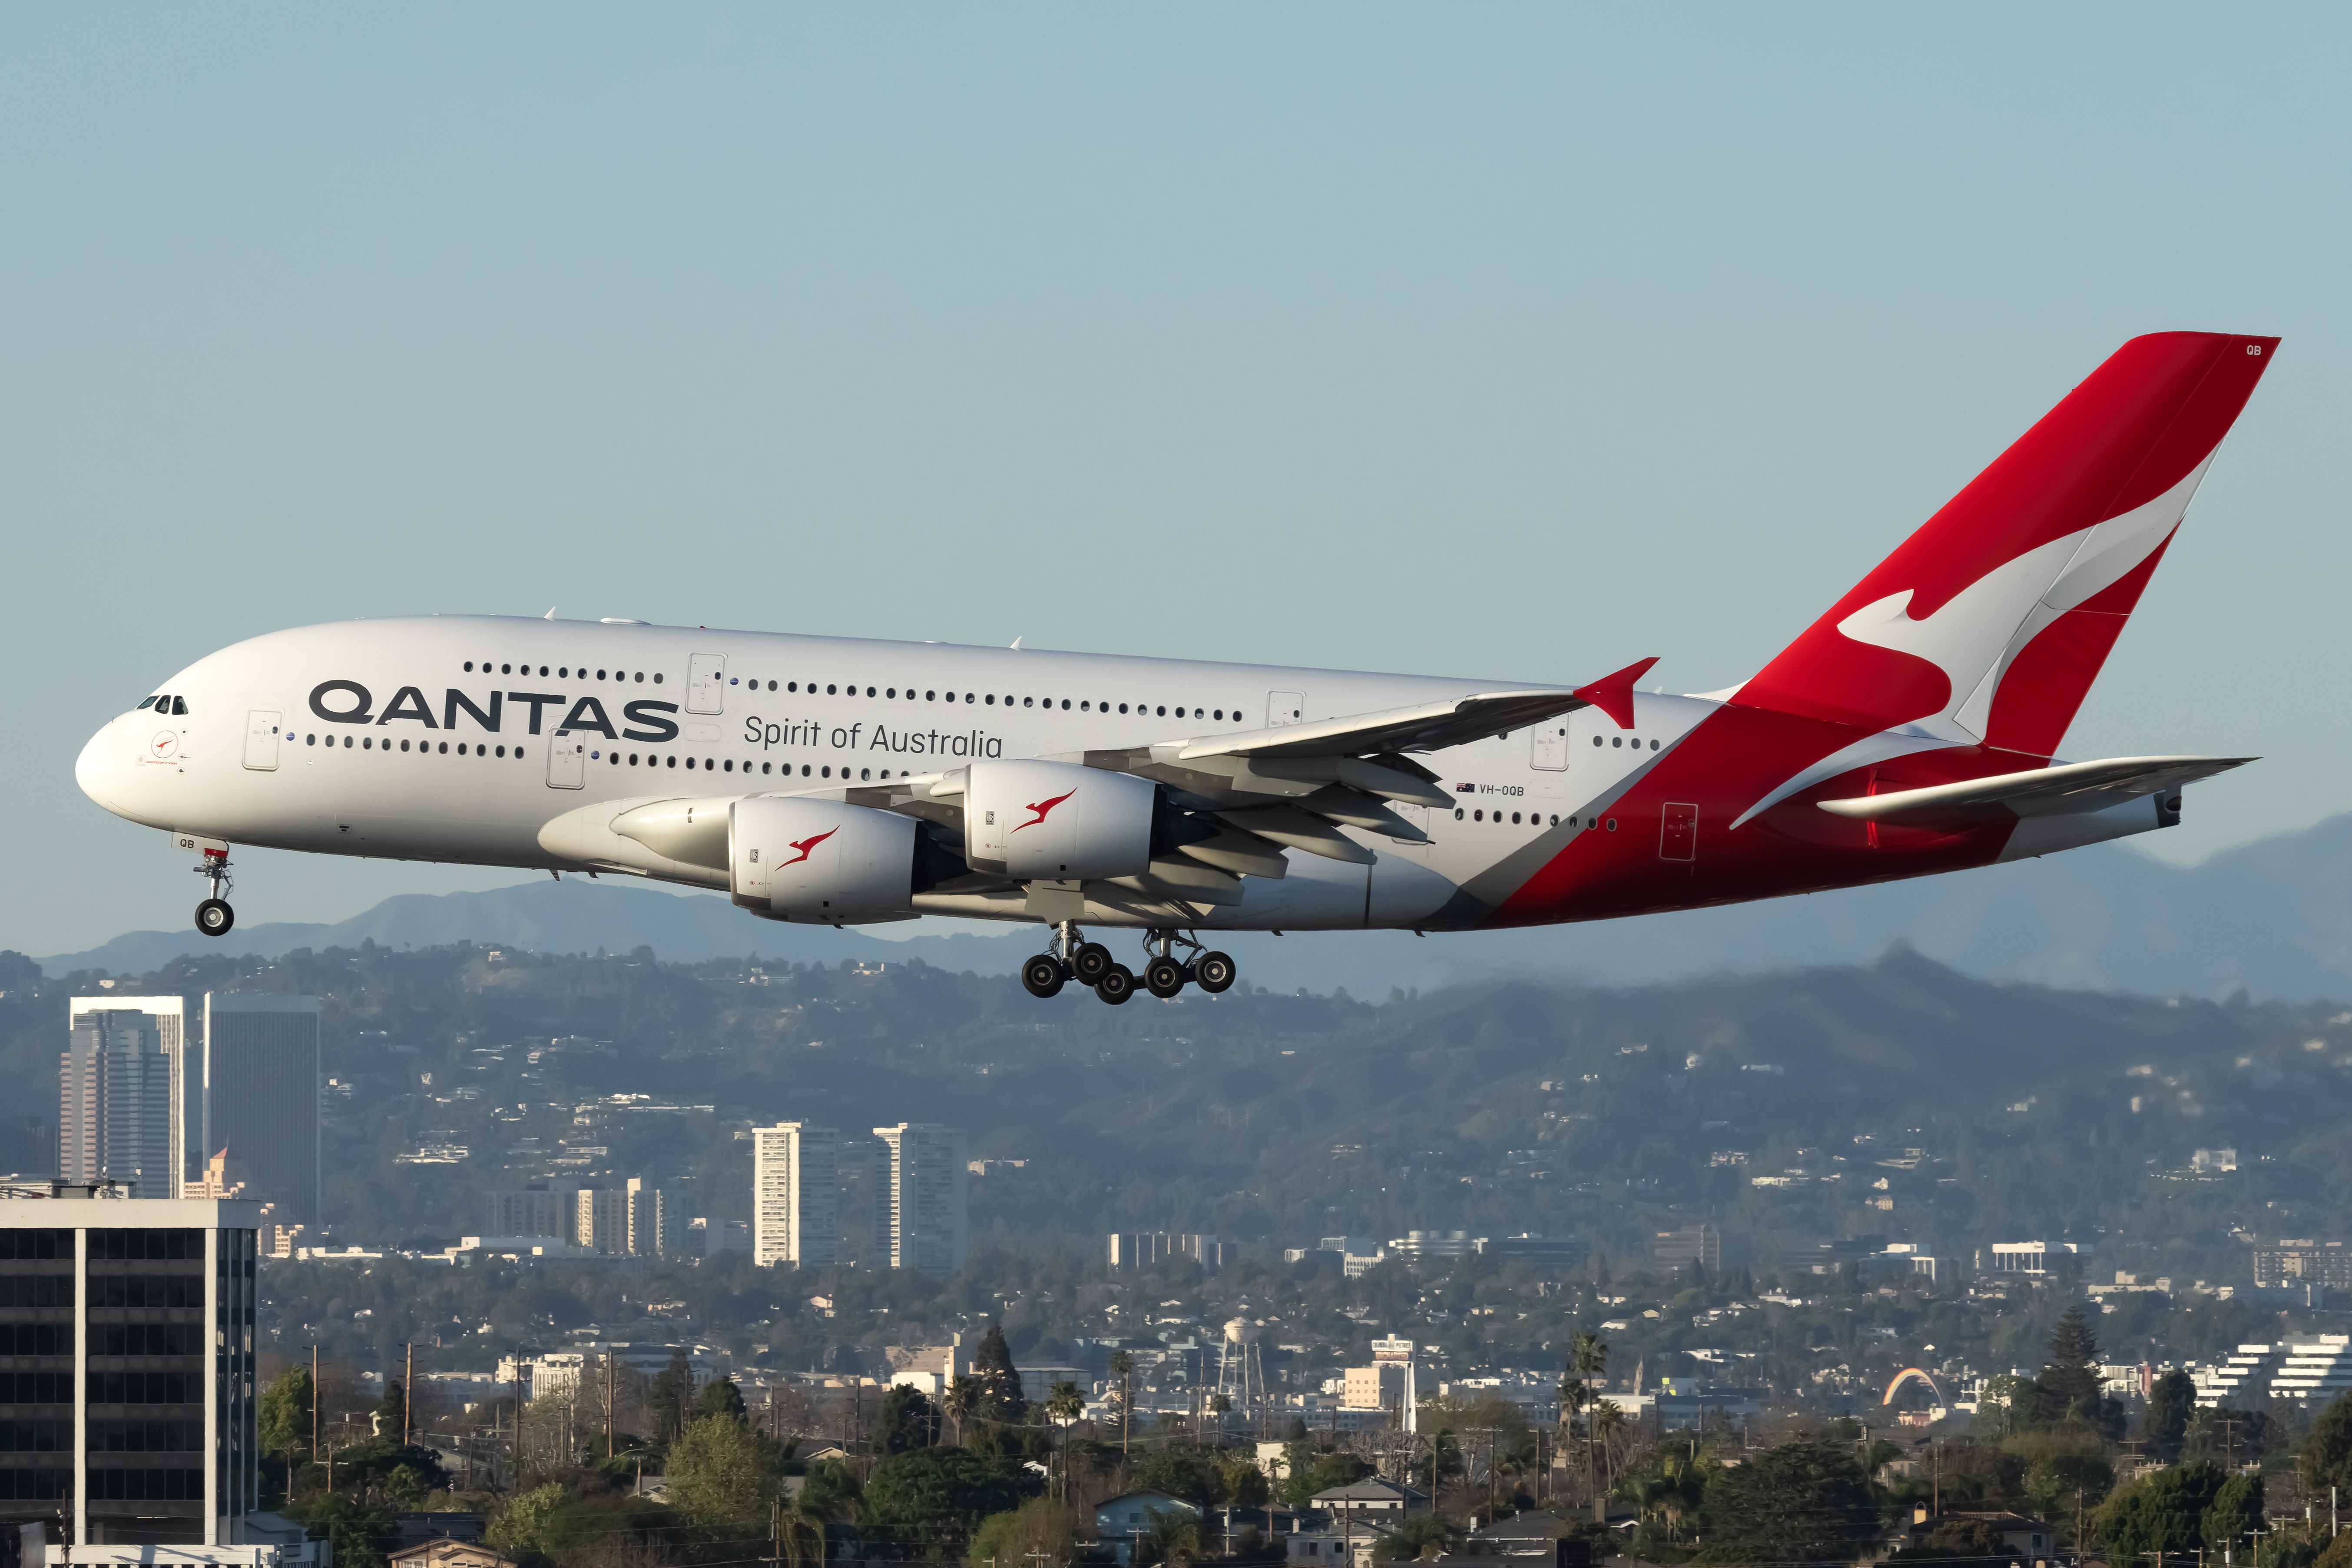 A Qantas Airbus A380 about to land.